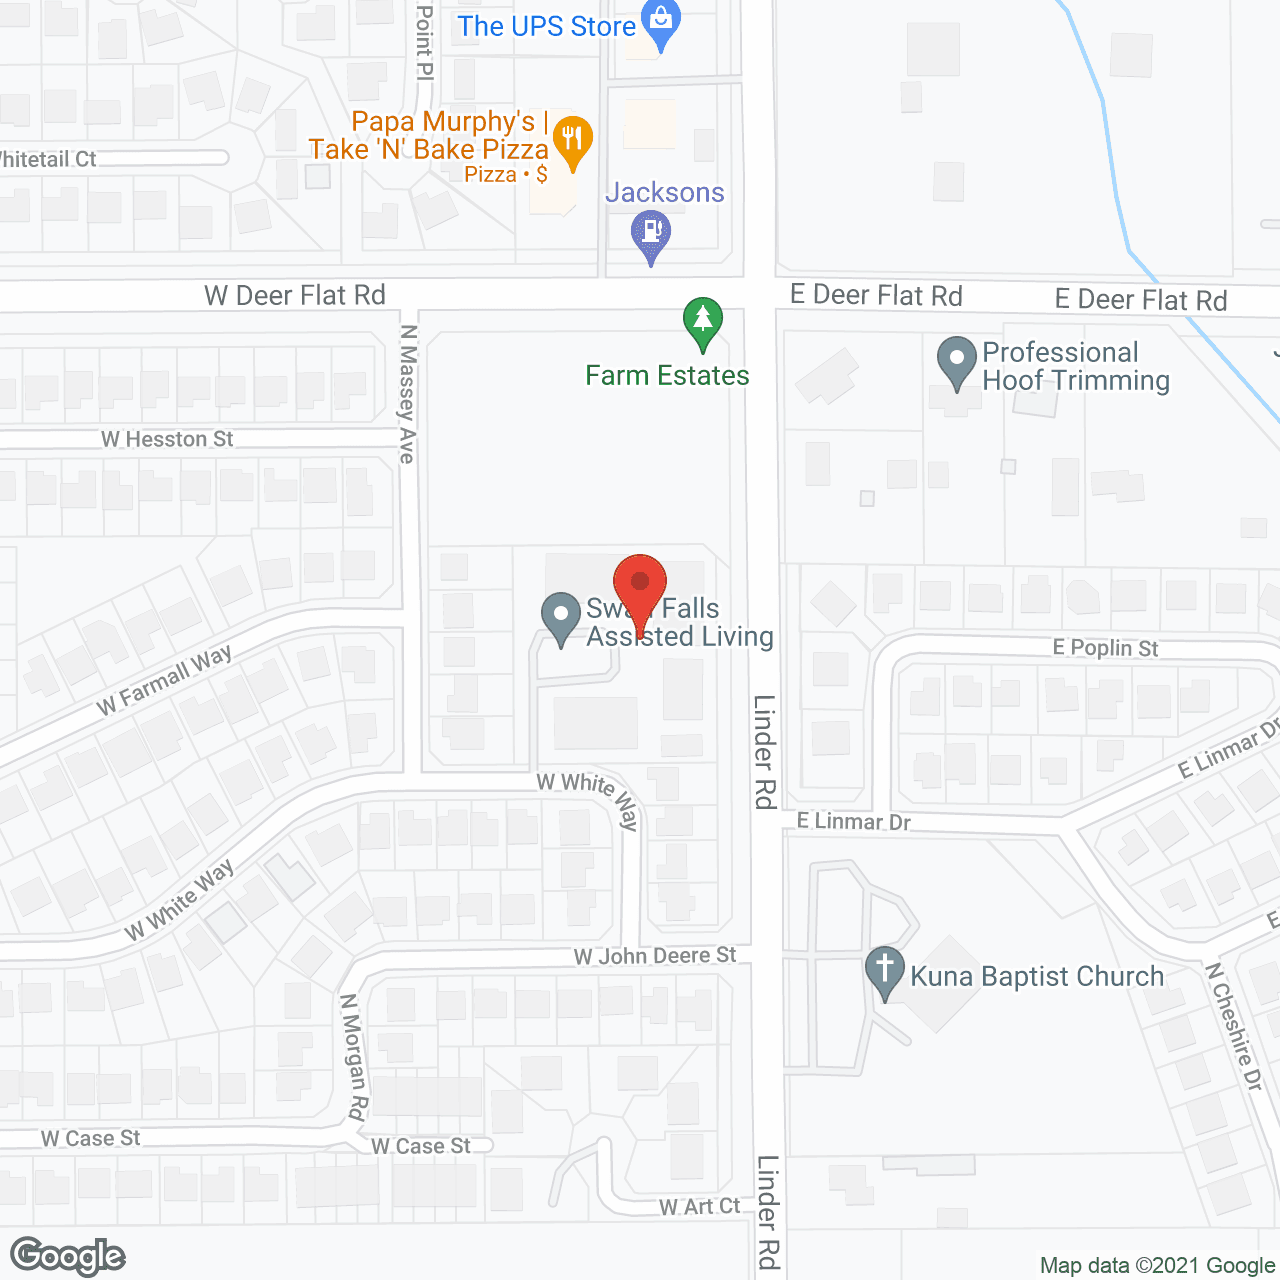 Swan Falls Assisted Living in google map